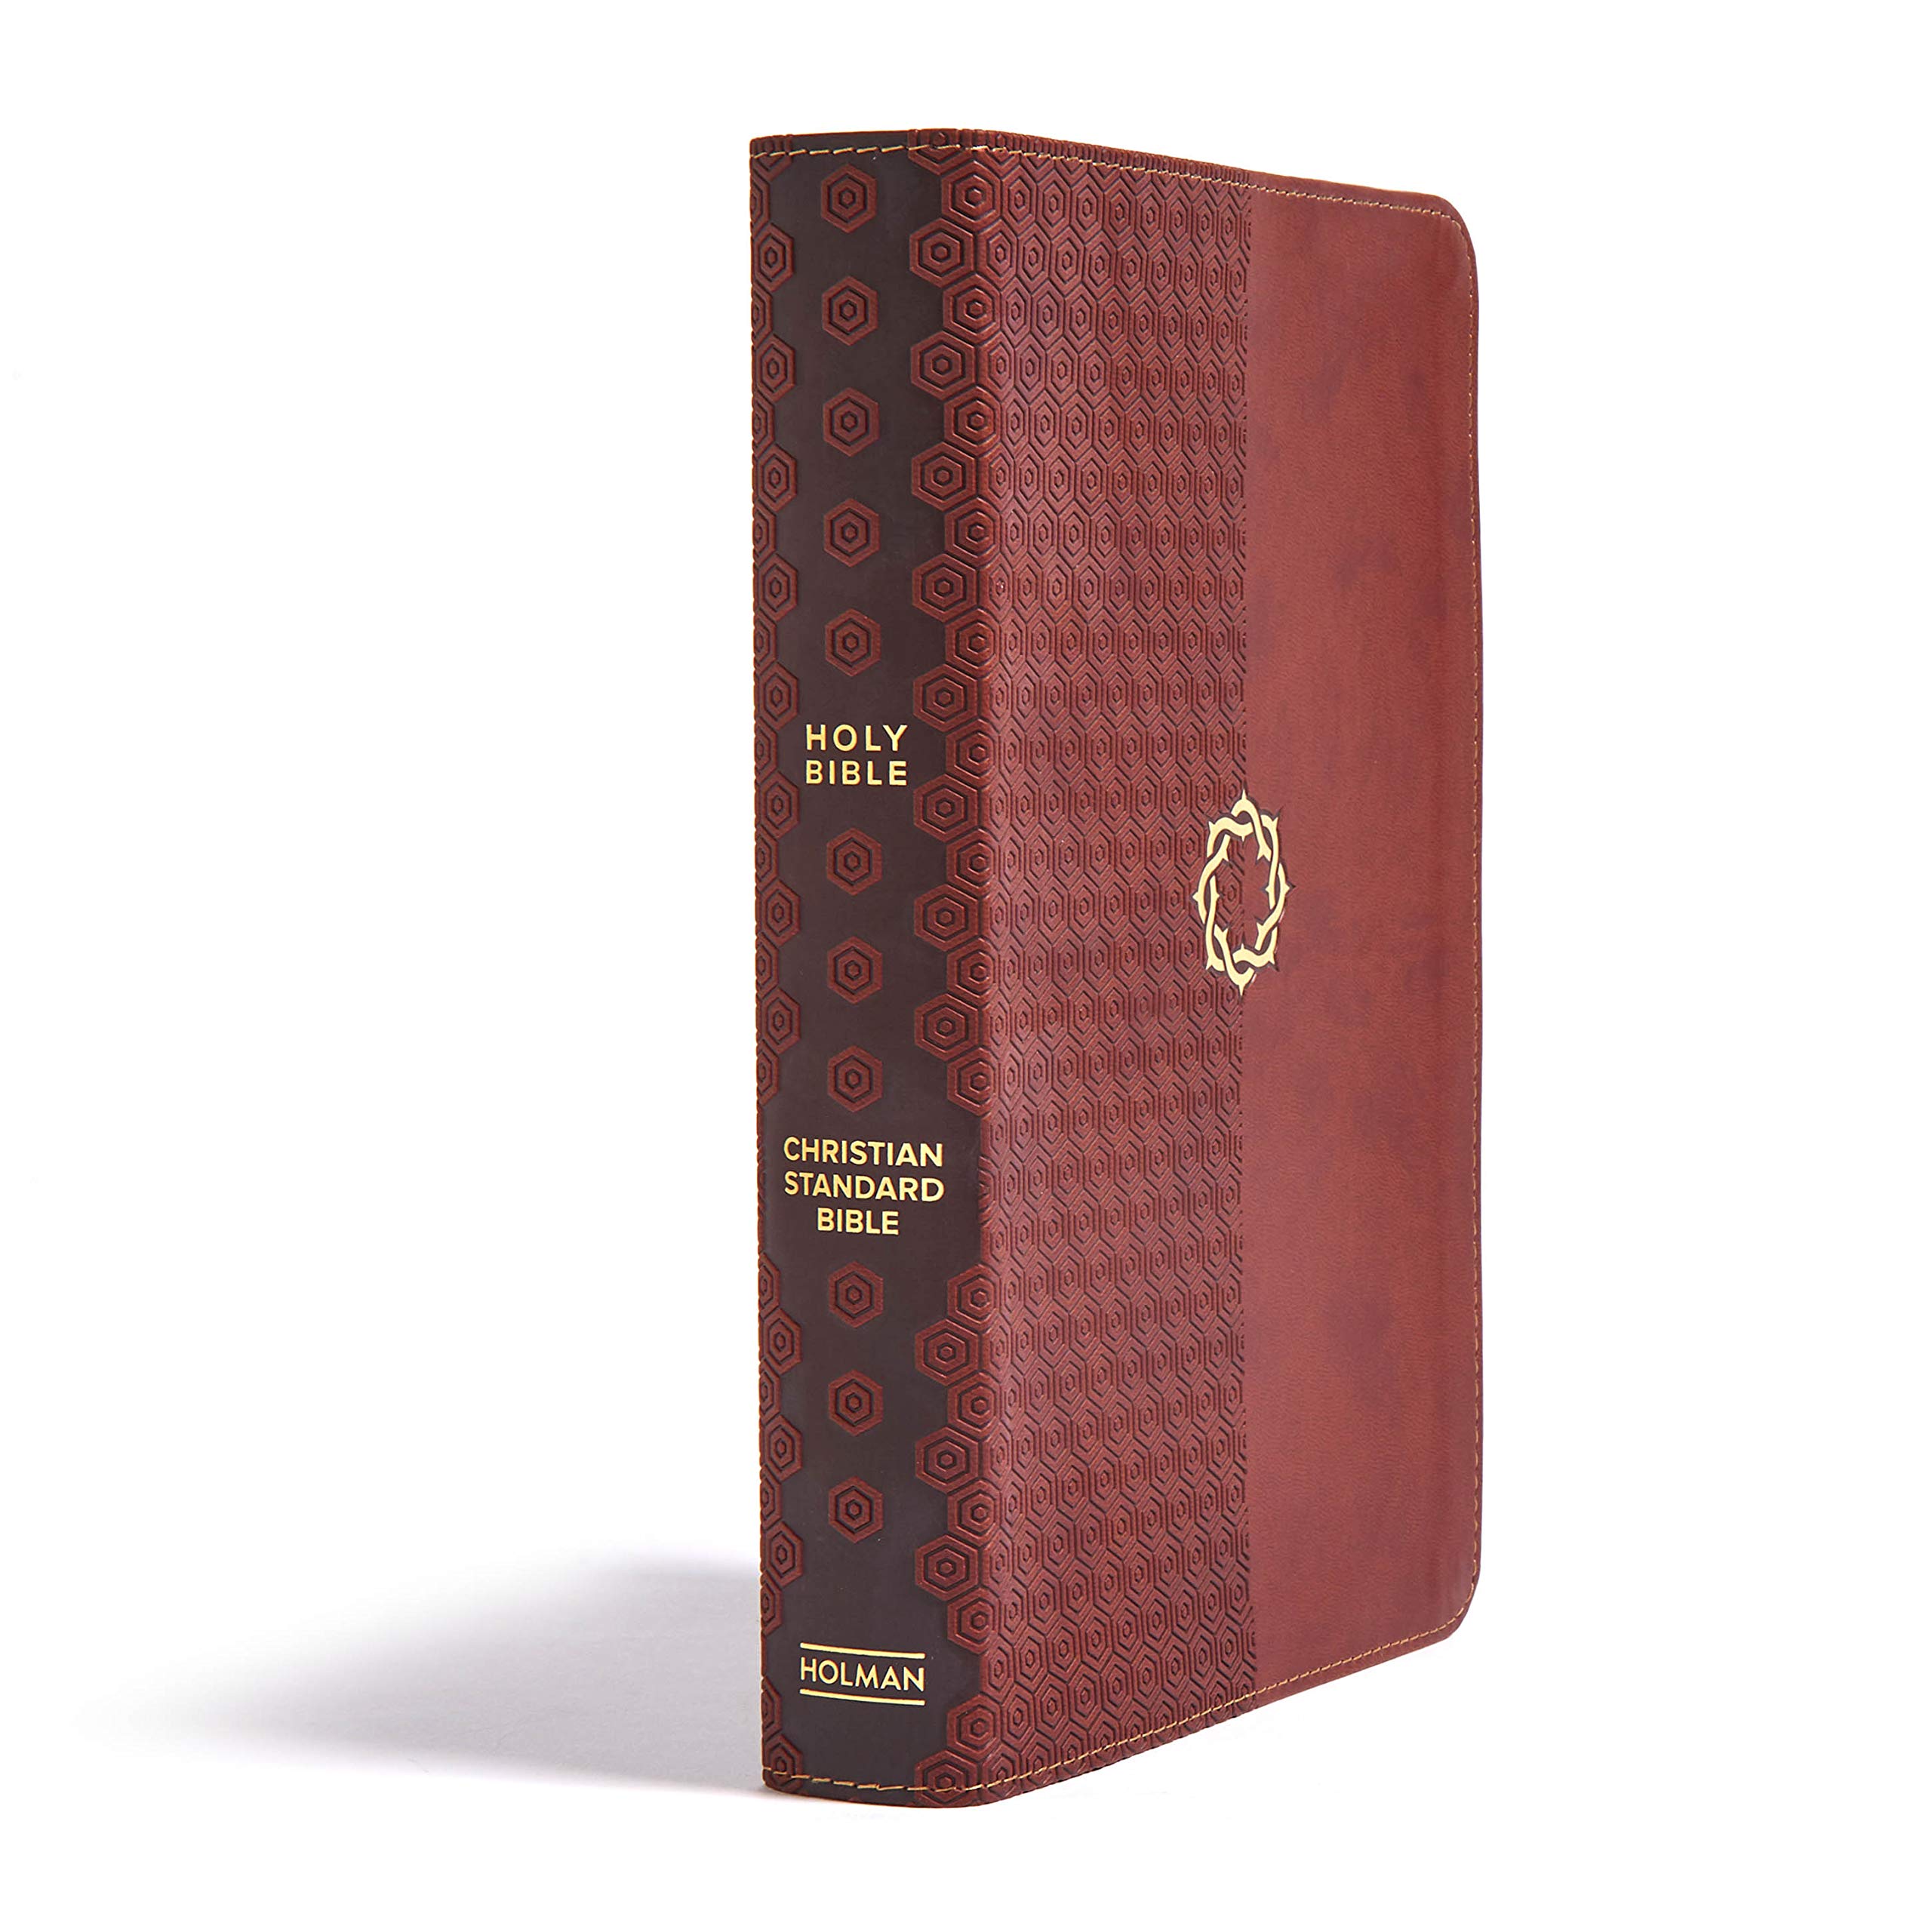 CSB Essential Teen Study Bible, Walnut LeatherTouch, Devotionals, Study Tools, Red Letter, Presentation Page, Full-Color Maps, Easy-to-Read Bible Serif Type